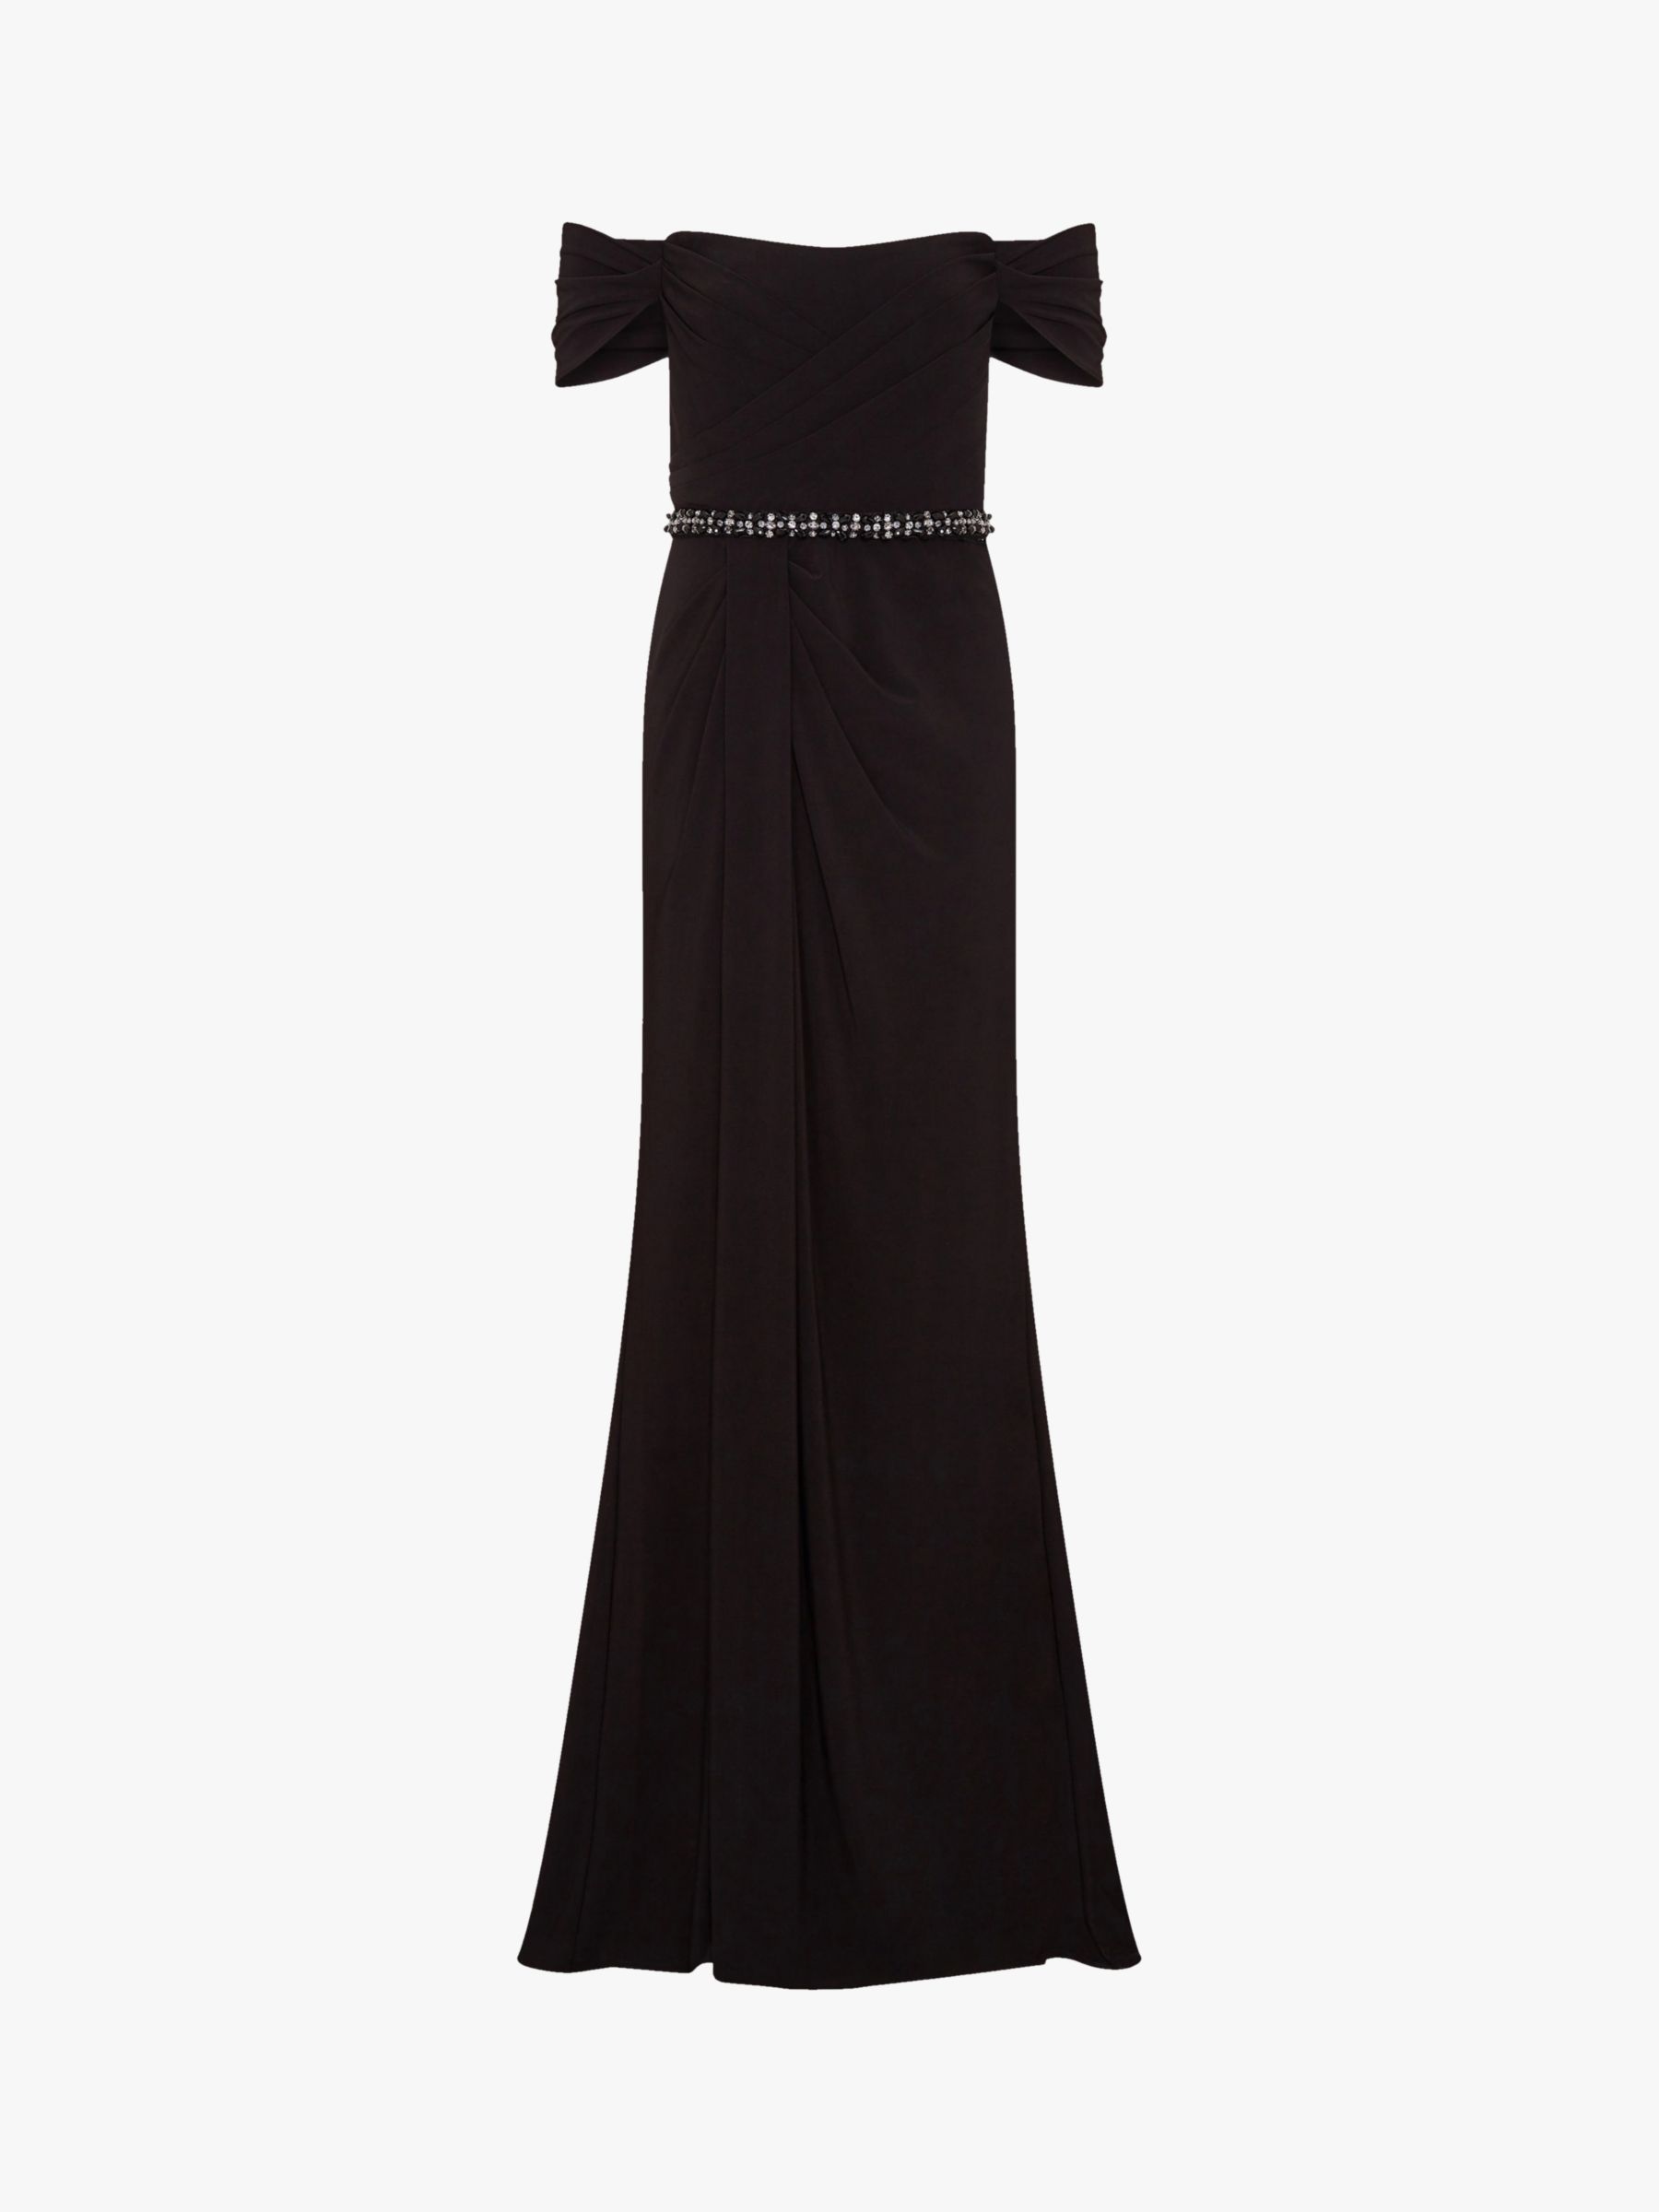 adrianna papell jersey gown